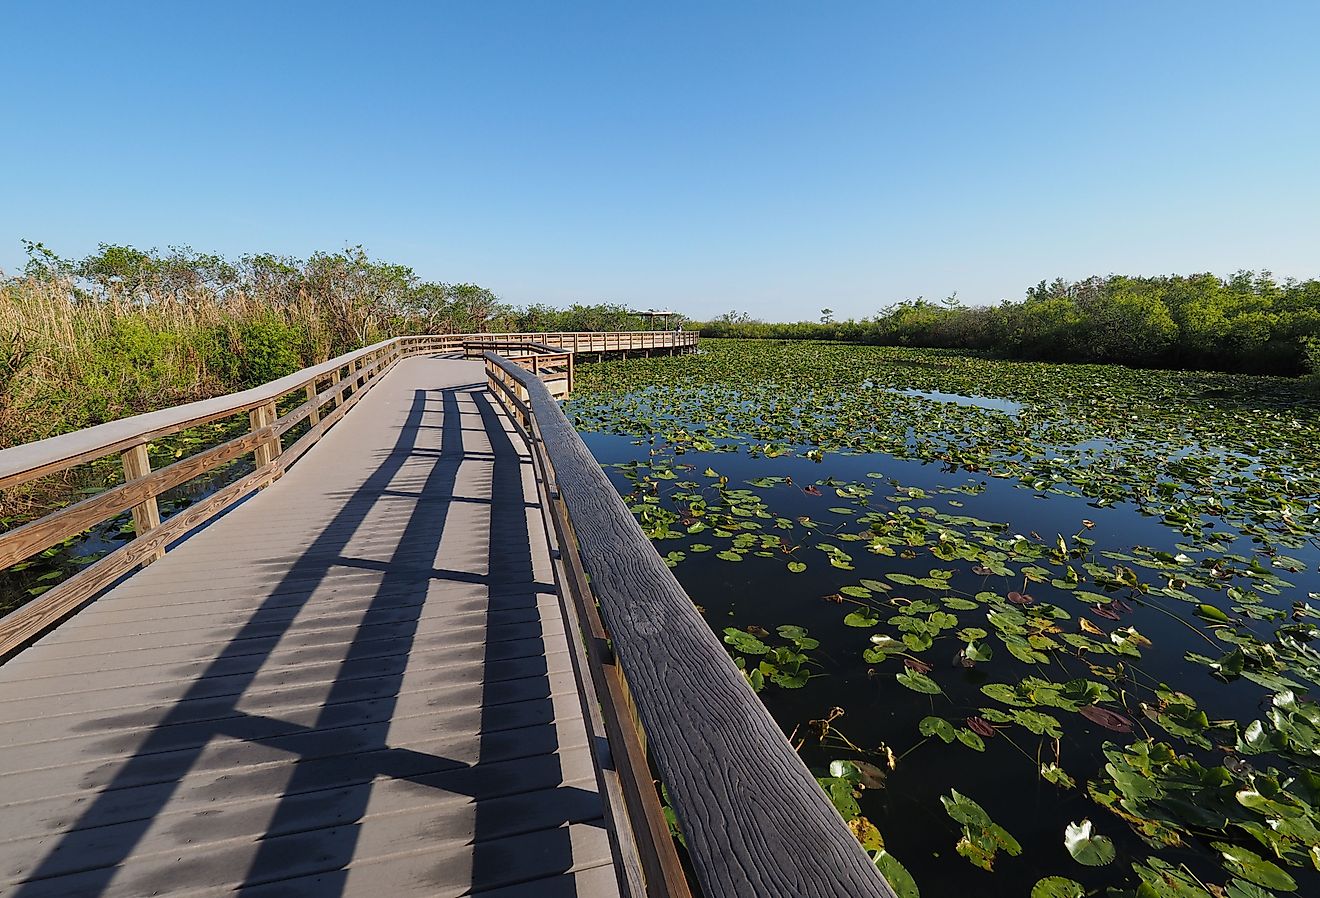 Anhinga Trail boardwalk over pond covered with water lilies in Everglades National Park, Florida.